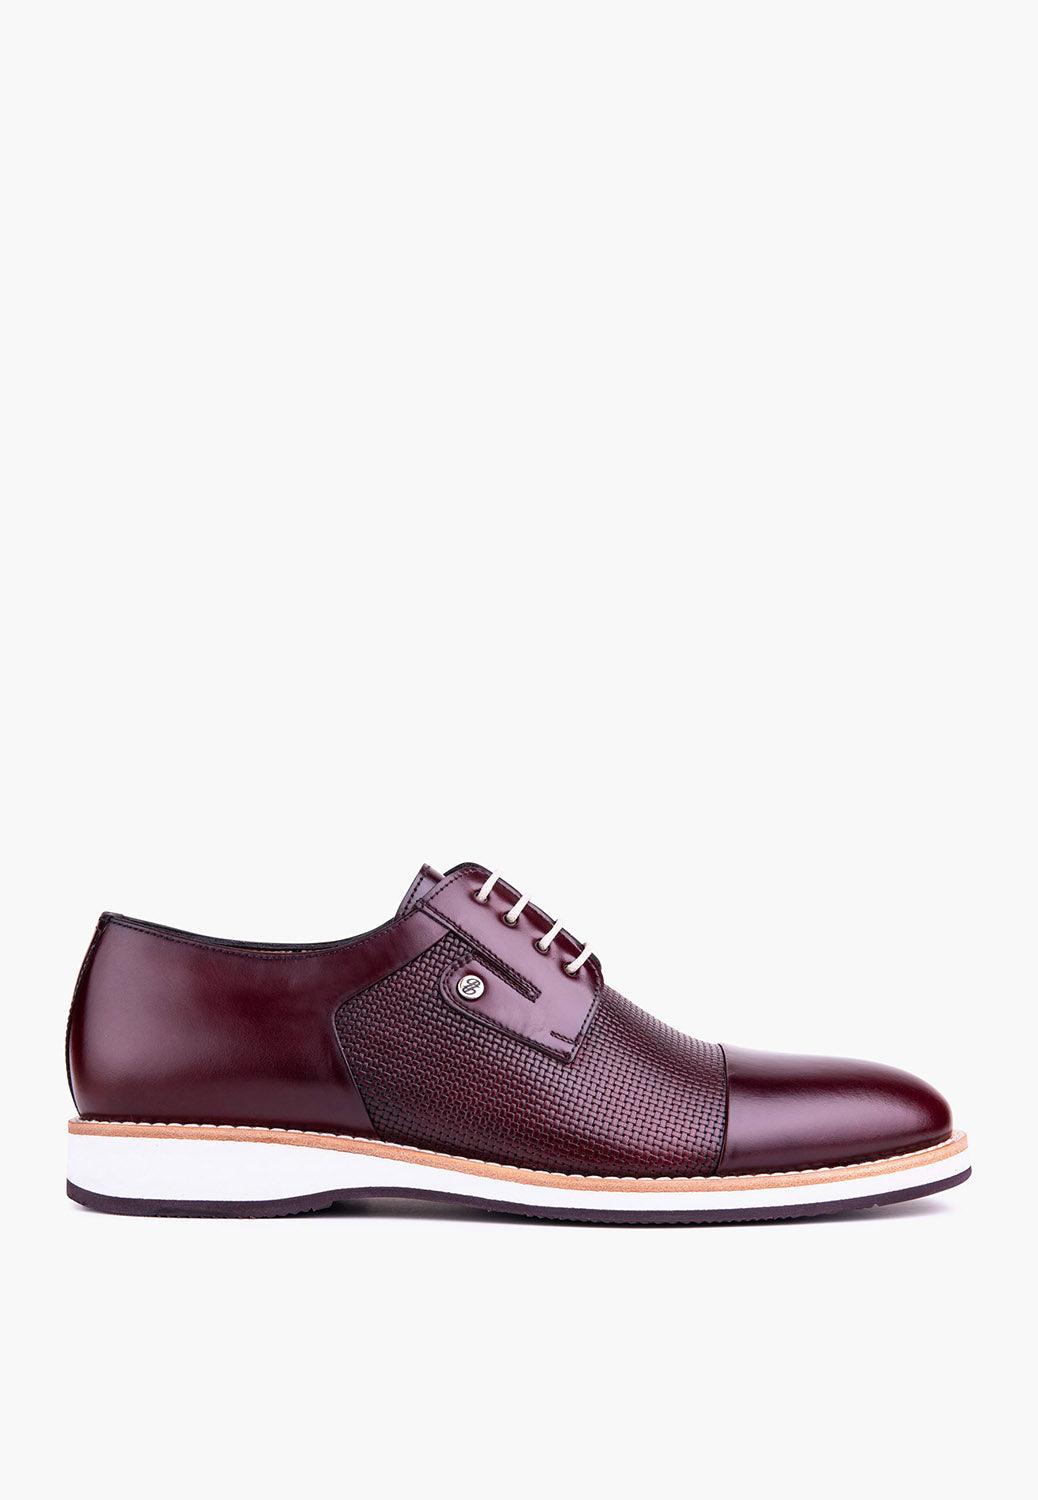 Clemente Lace Up Burgundy - SEPOL Shoes